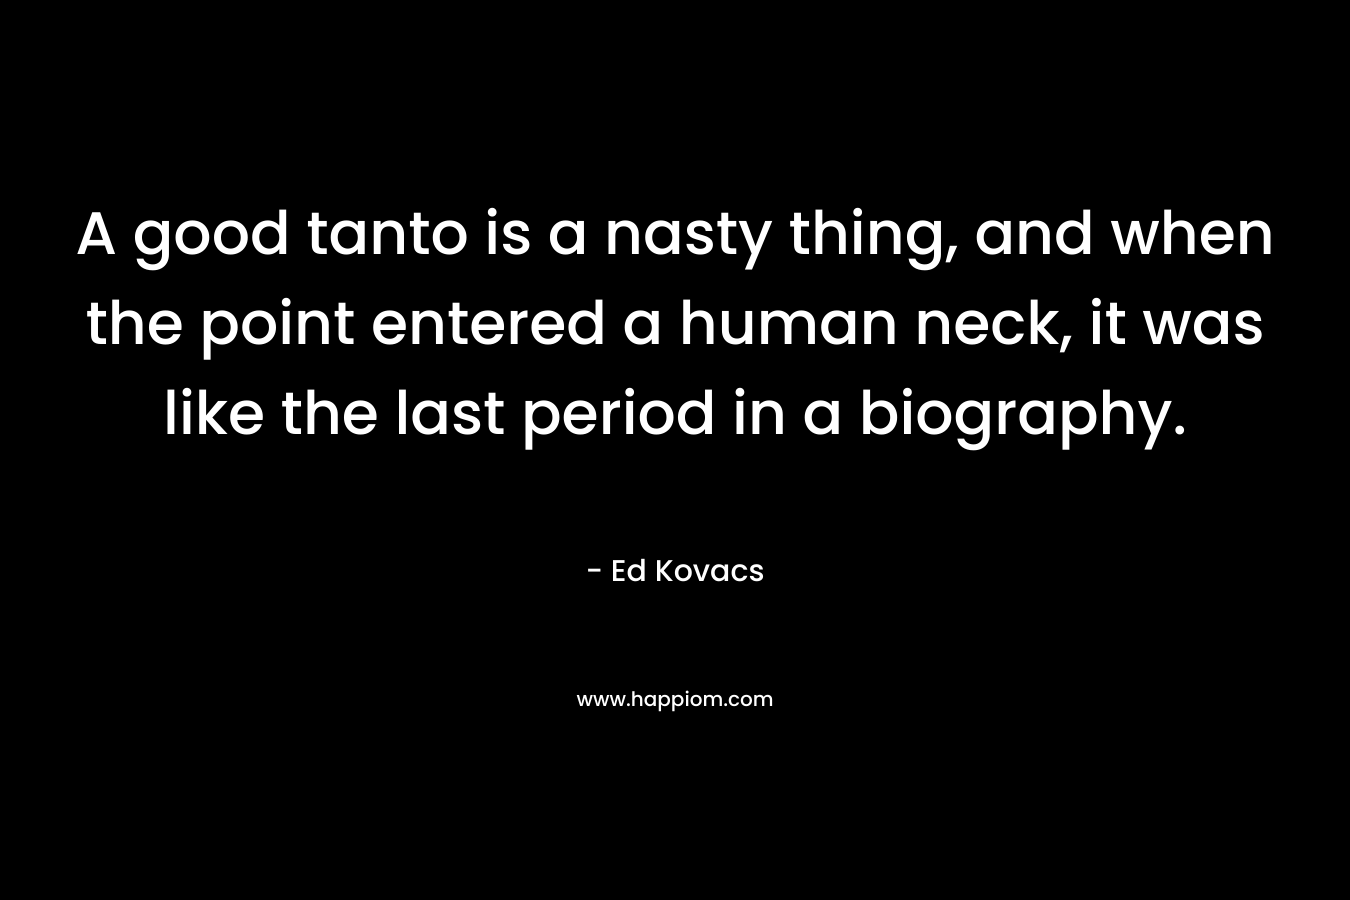 A good tanto is a nasty thing, and when the point entered a human neck, it was like the last period in a biography. – Ed Kovacs